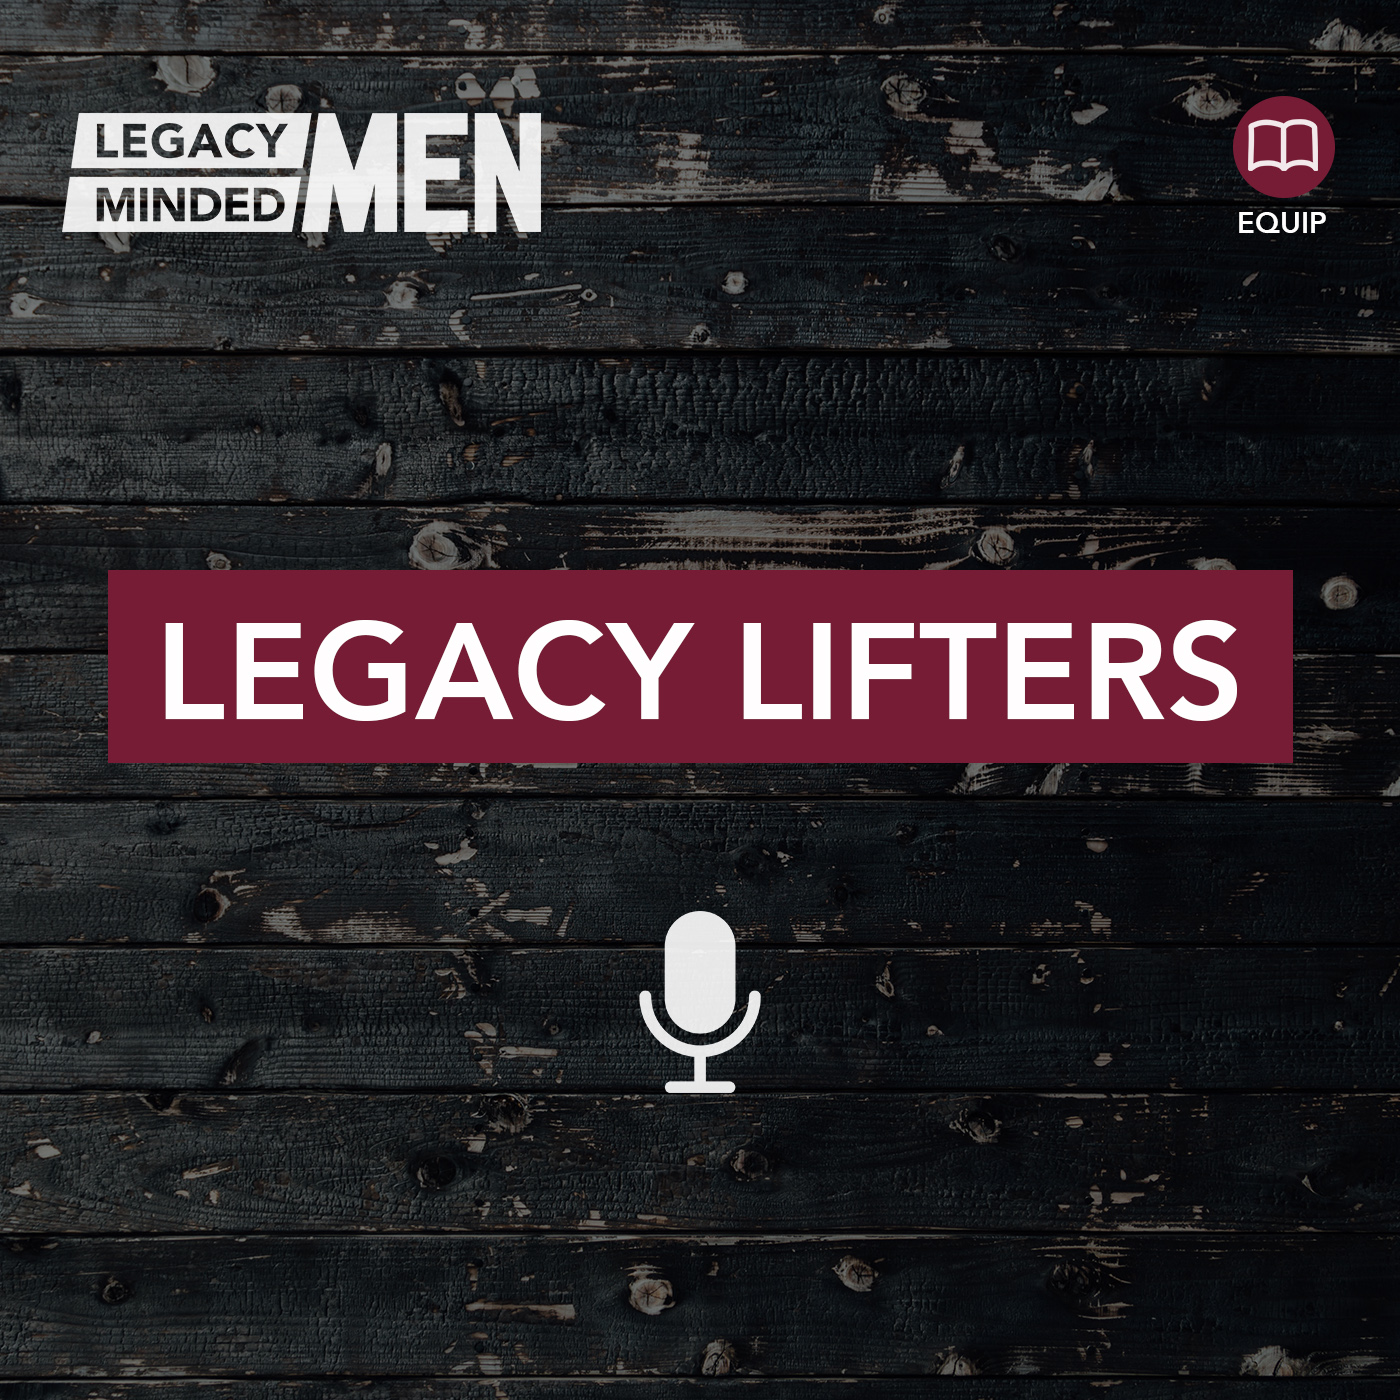 Legacy Lifters by Legacy Minded Men